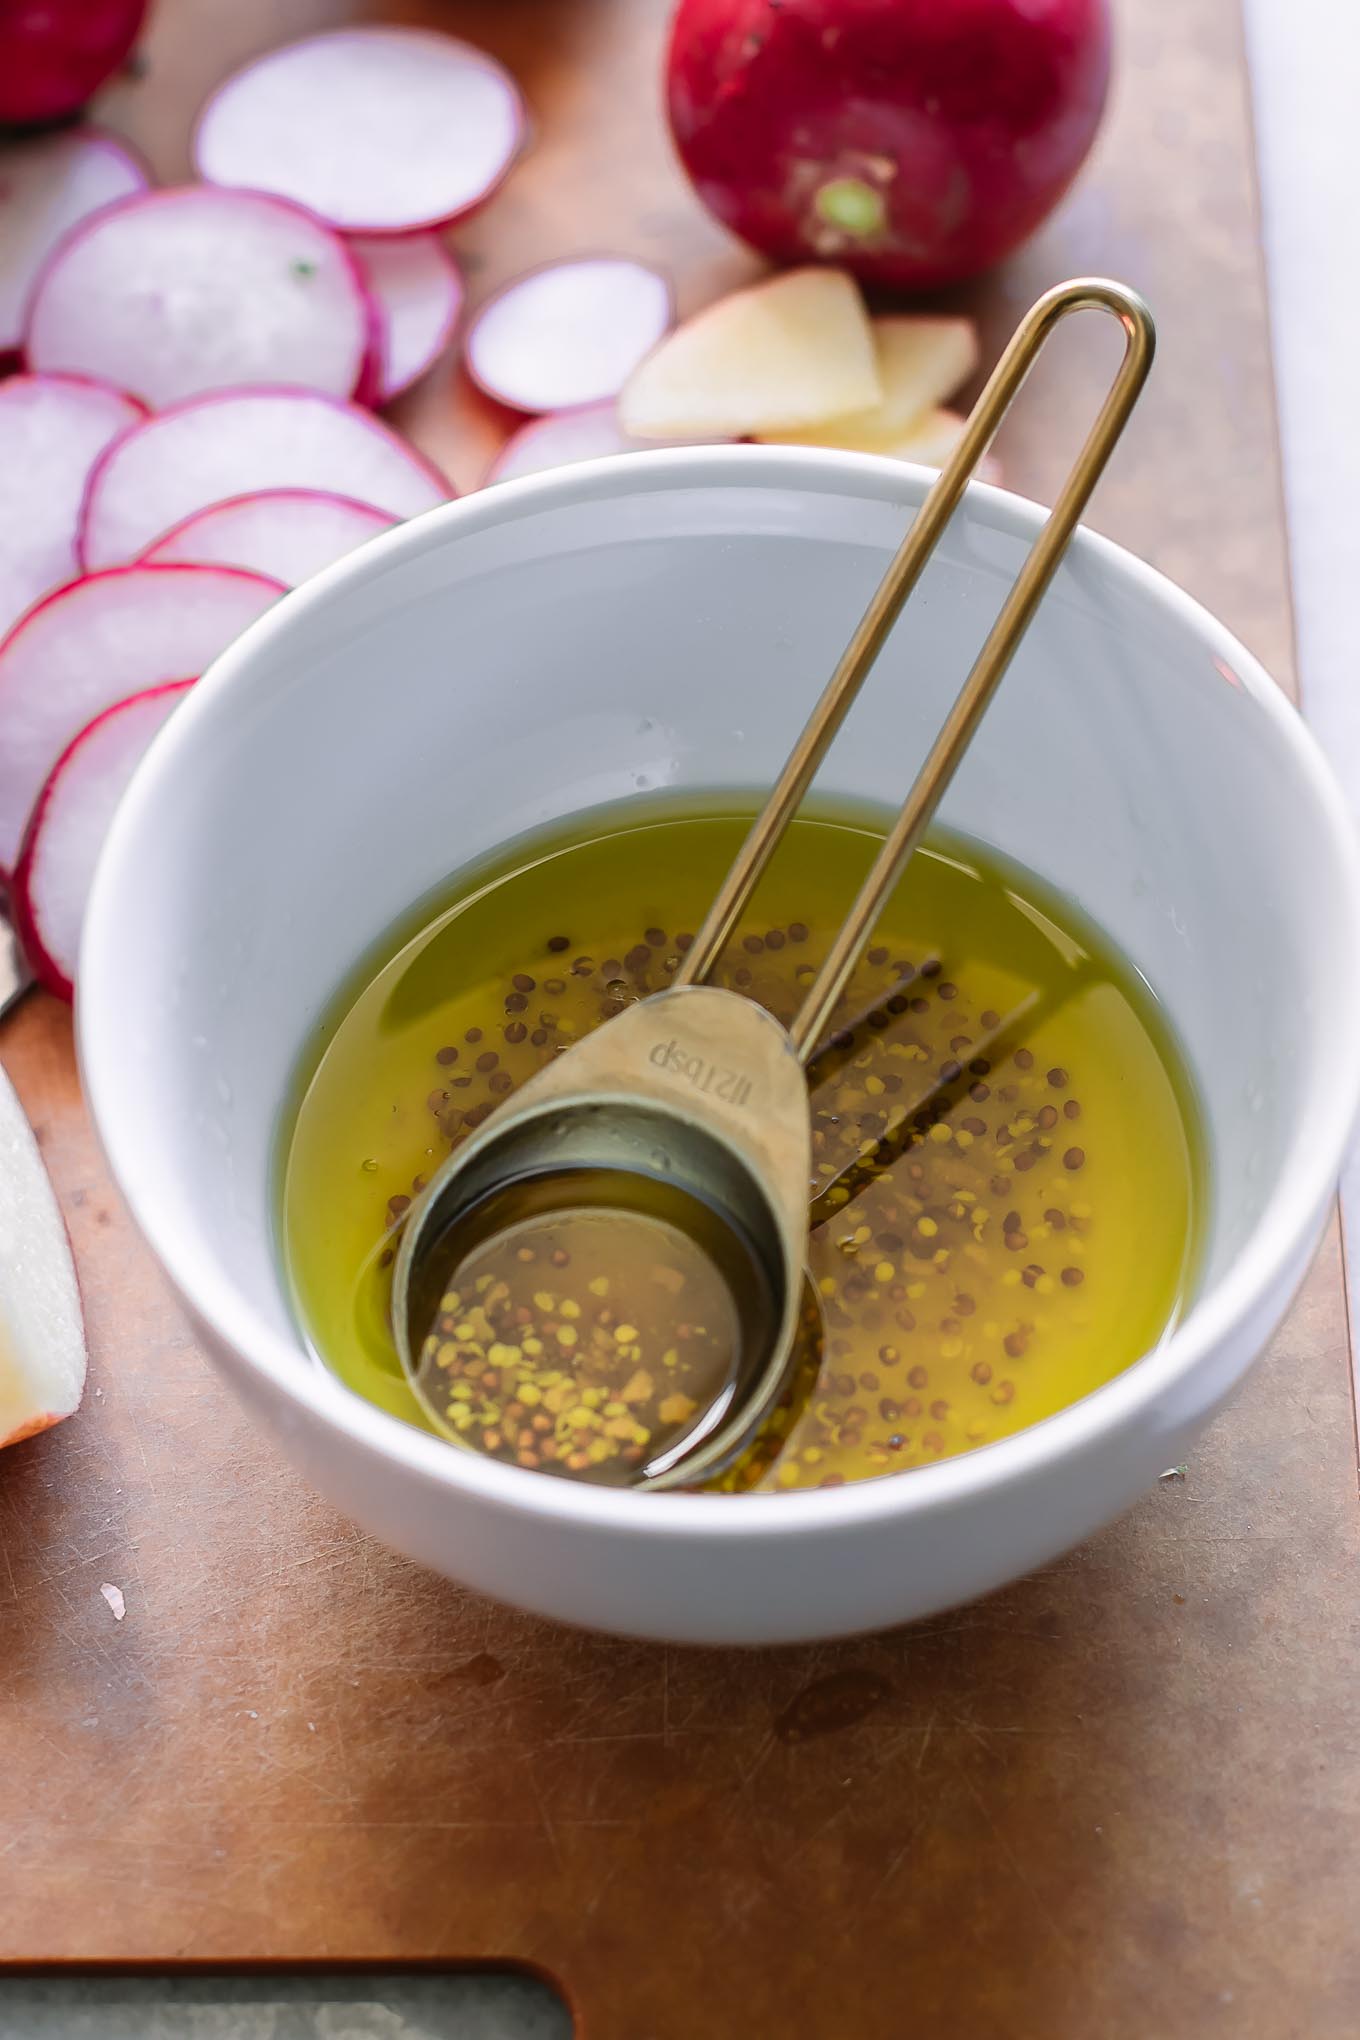 homemade salad dressing in a bowl with a gold teaspoon